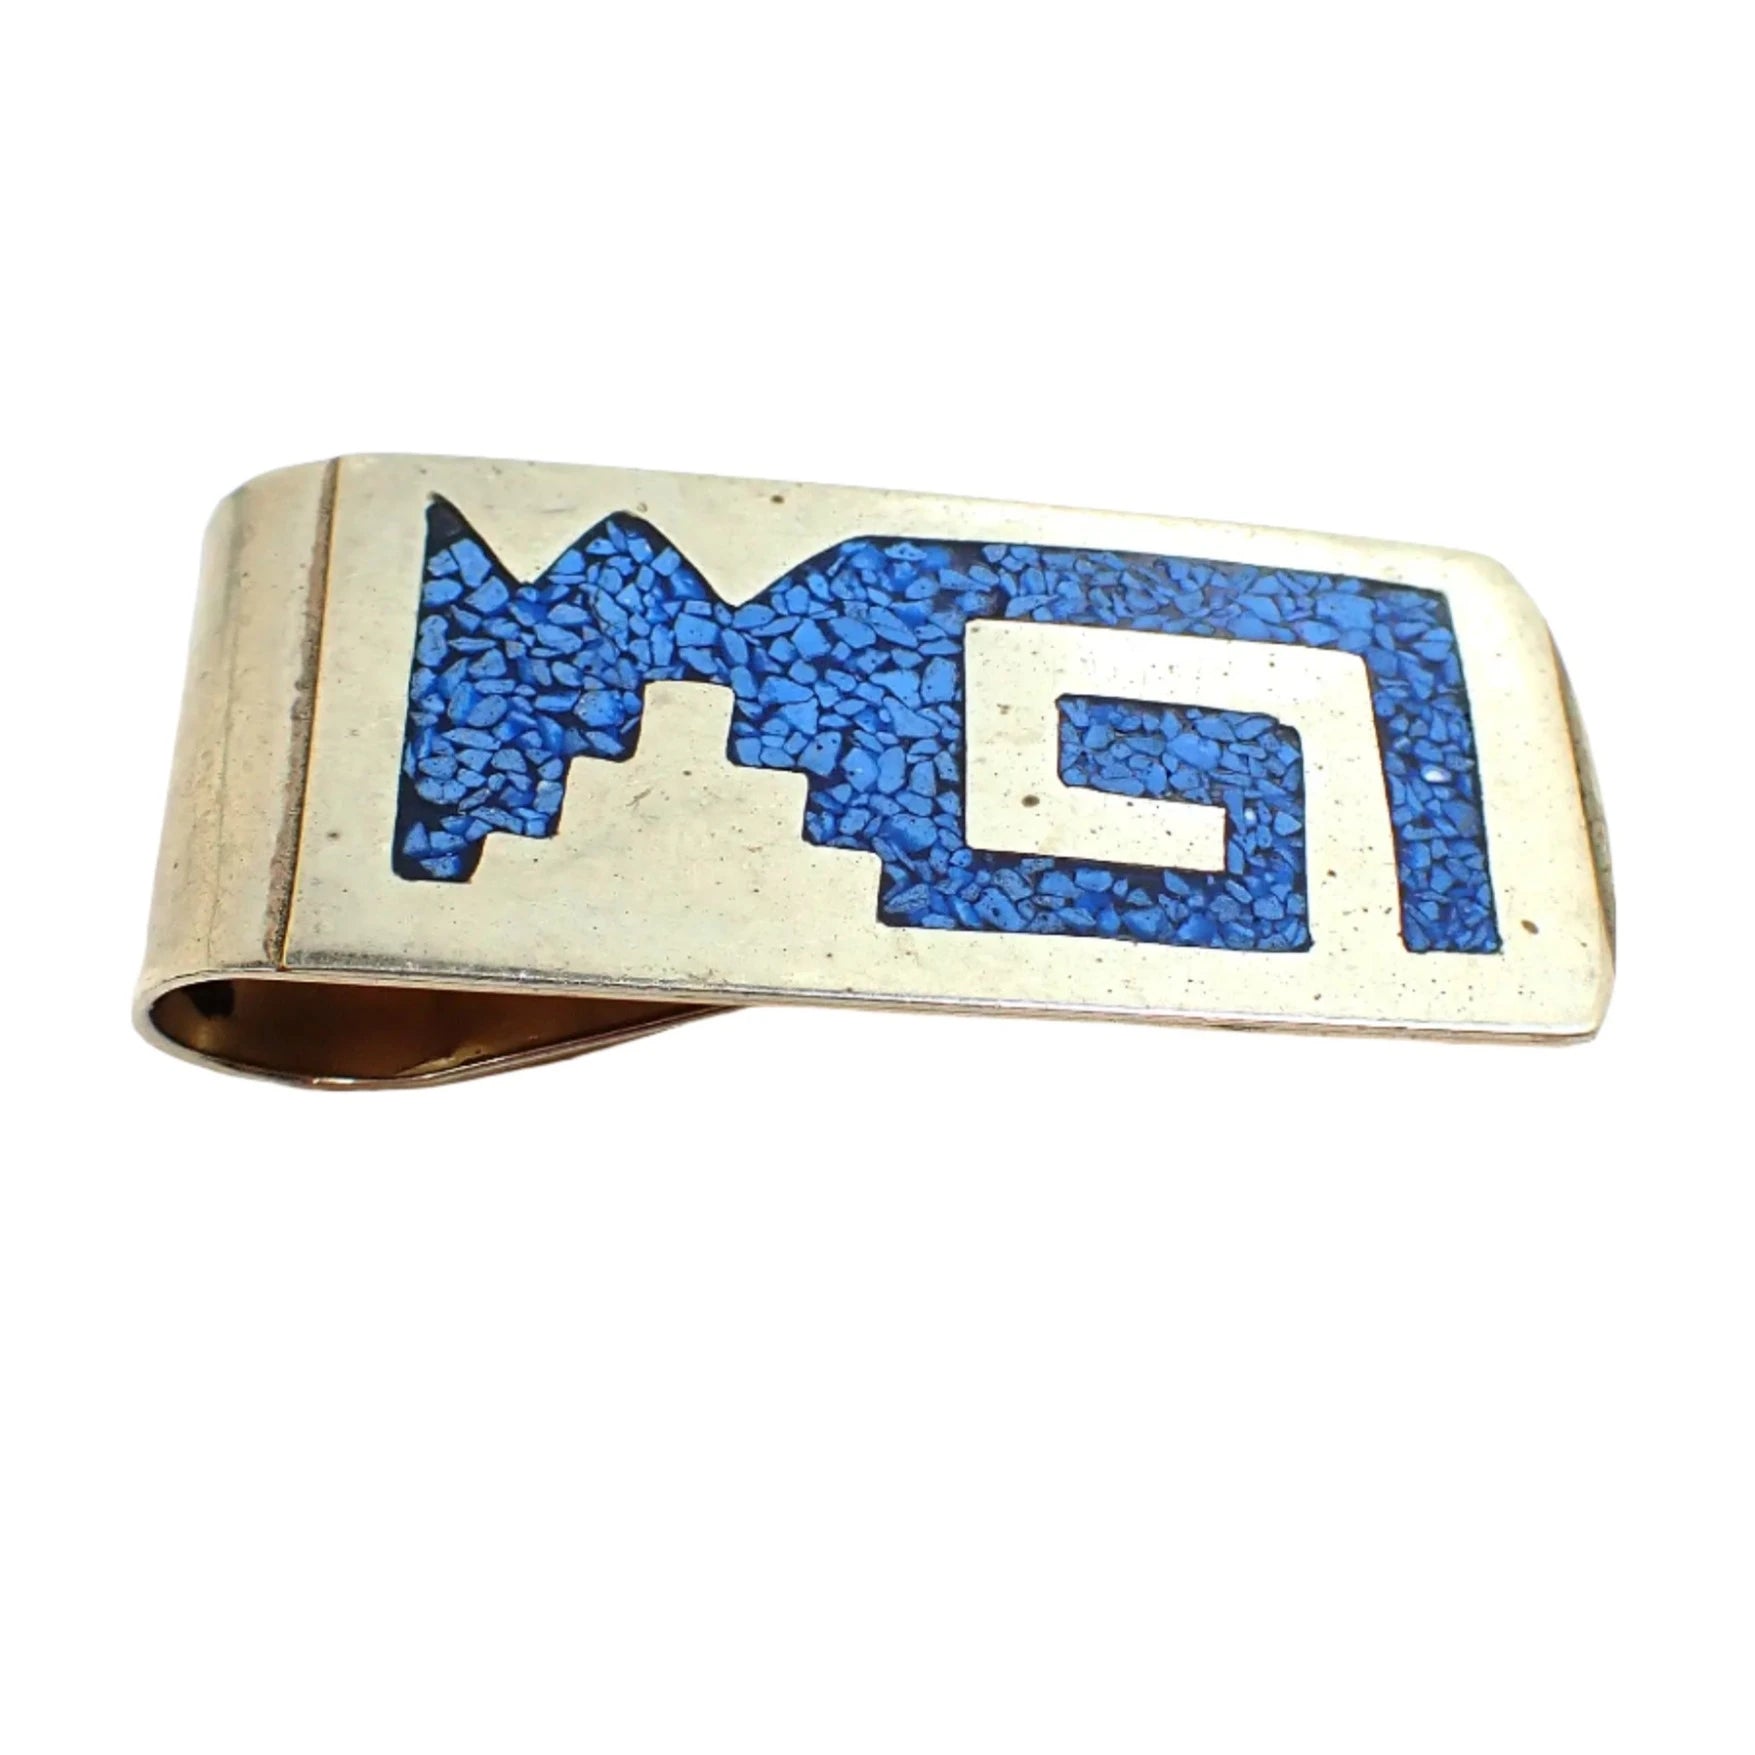 Angled view of the 1980's vintage money clip. It is silver tone in color with blue dyed faux turquoise stone chips inlaid in a Mexican Southwestern style design.